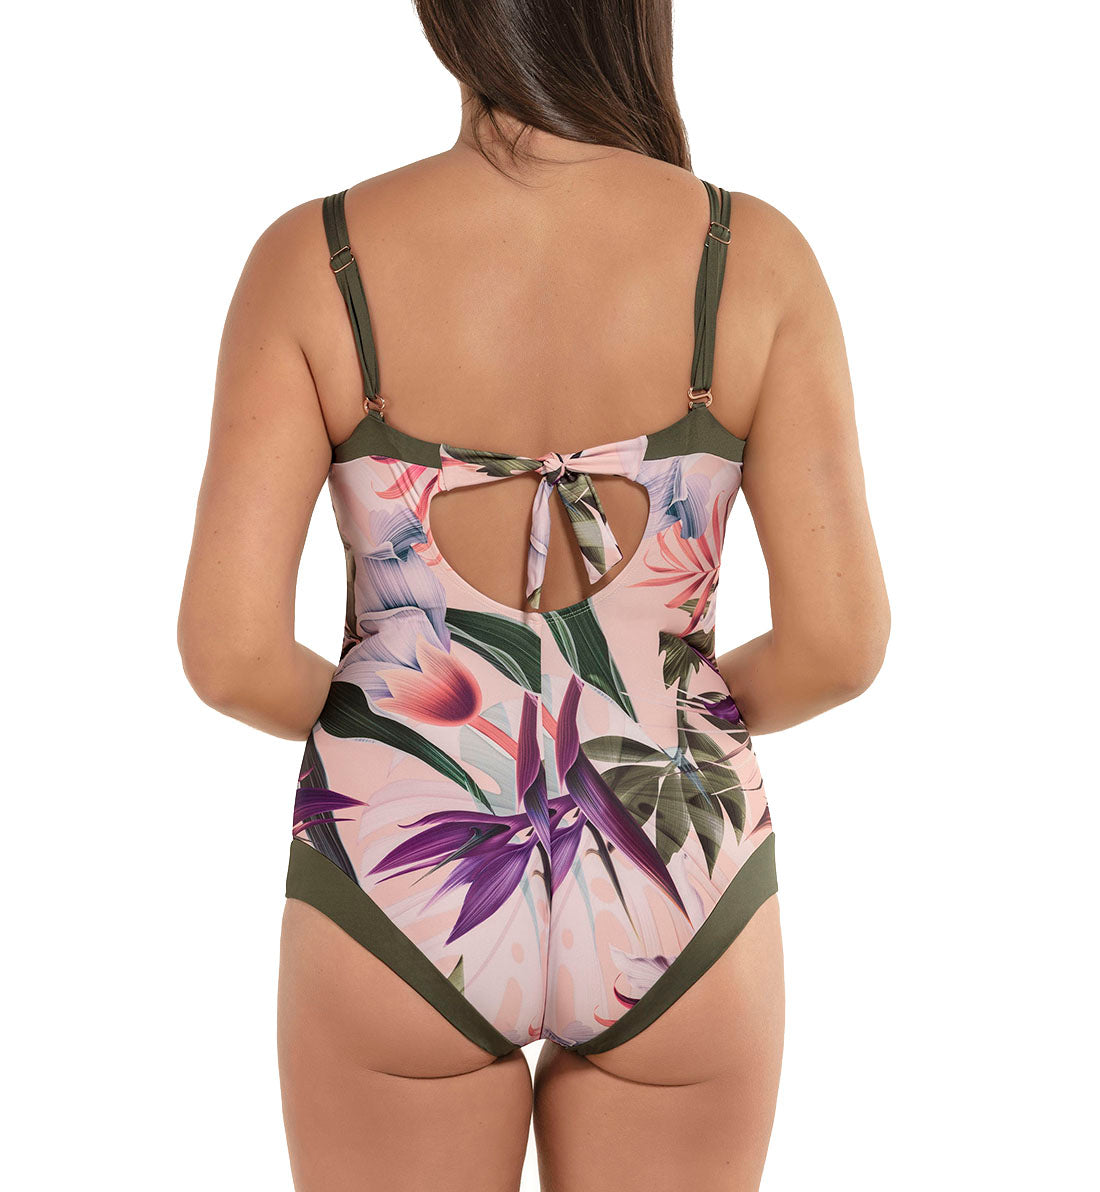 Leonisa Tie Back Double Strap Sculpting One Piece Swimsuit (190925),Small,Floral Pink - Floral Pink,Small